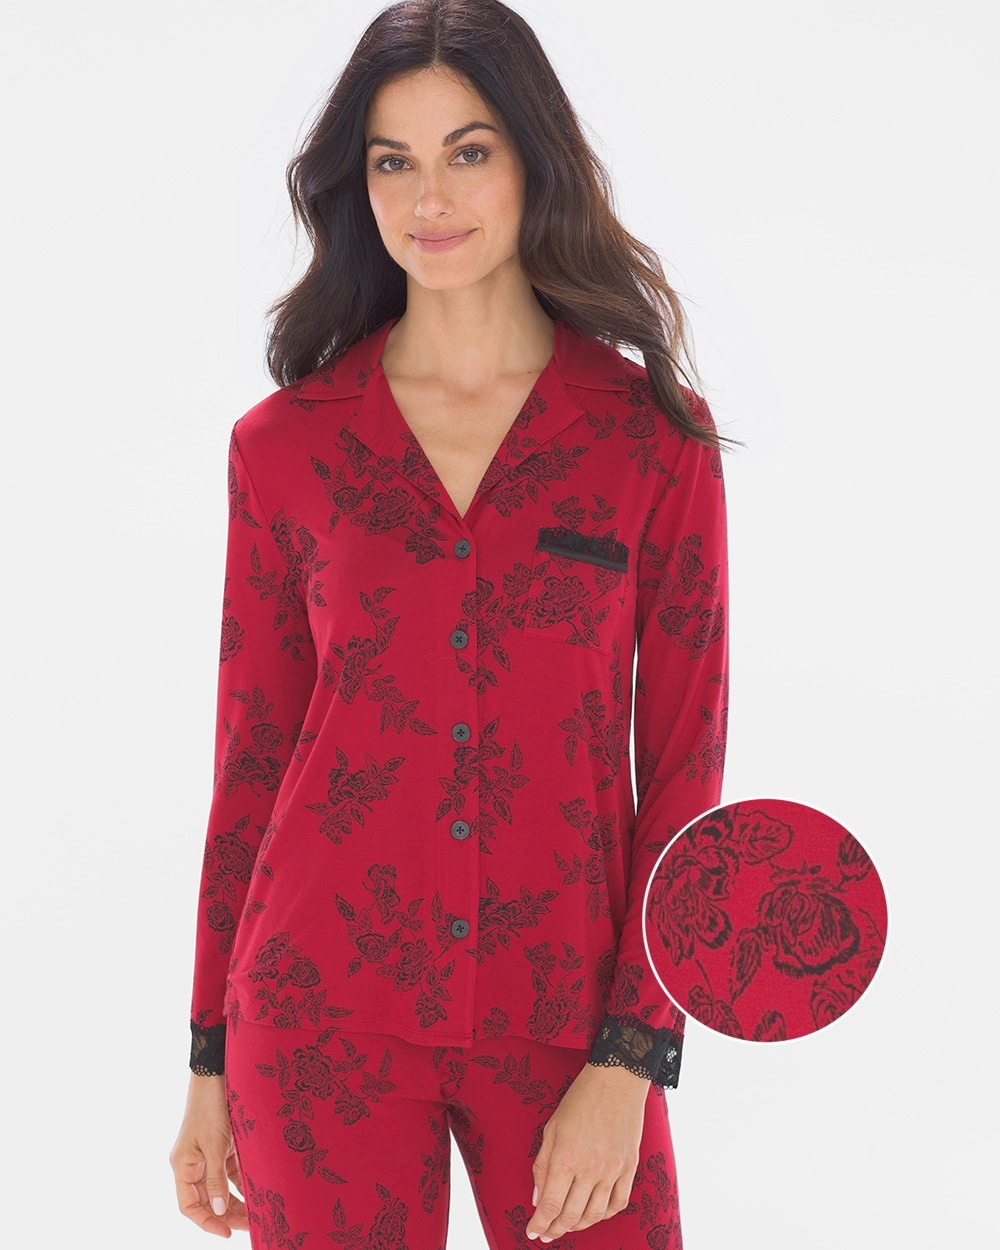 Cool Nights Signature Lace Long Sleeve Notch Collar Pajama Top Lace Floral Red